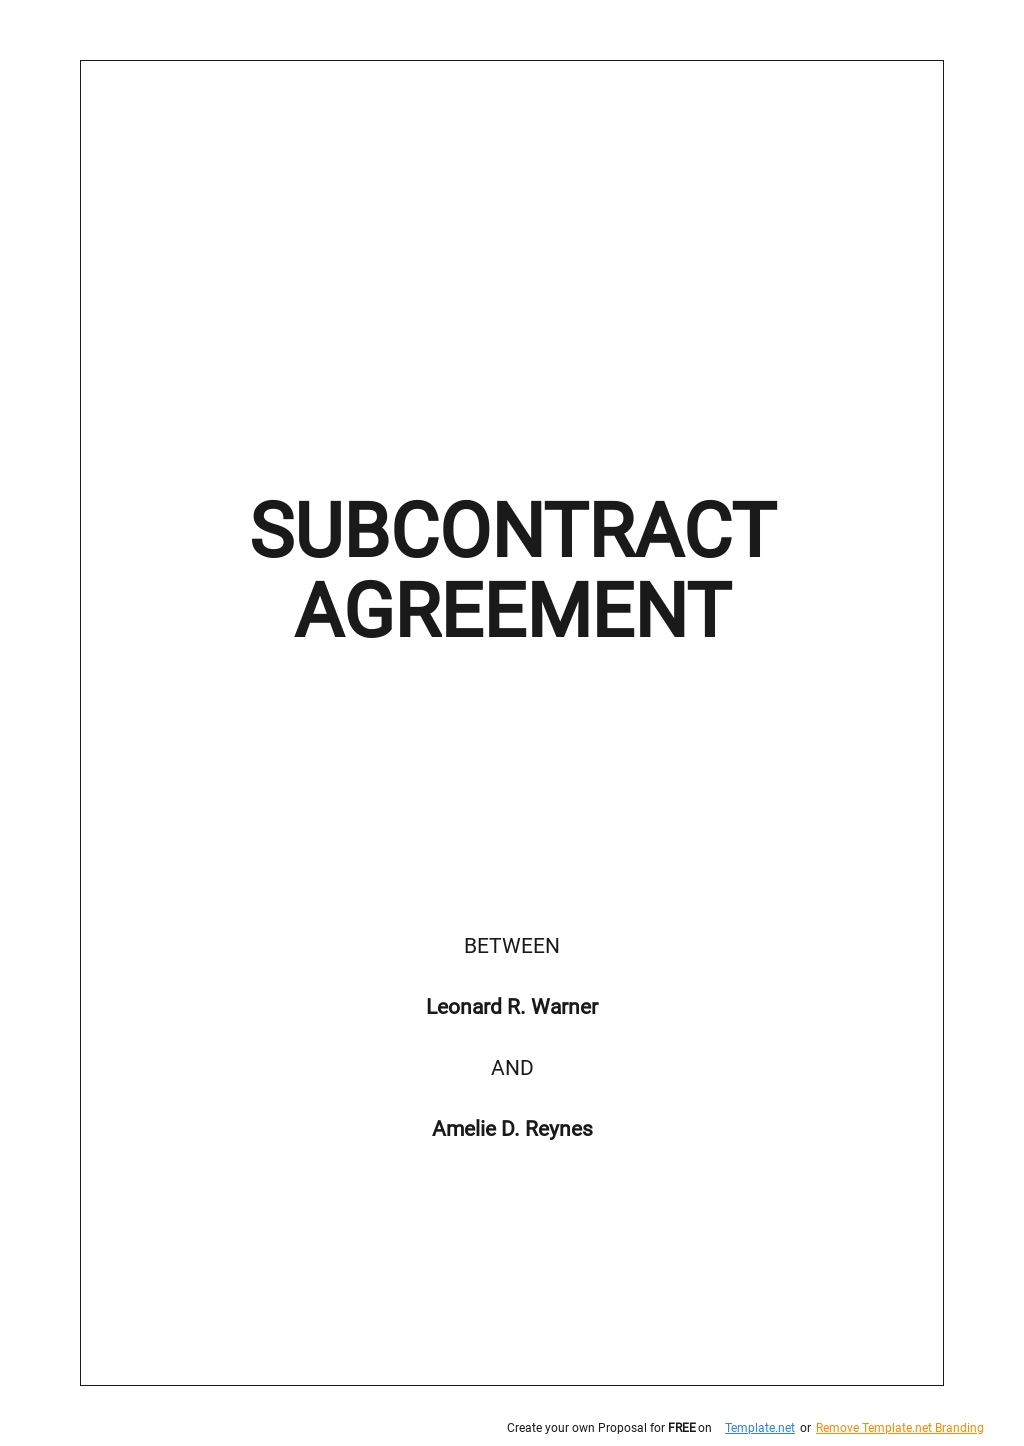 Simple Subcontract Agreement Template.jpe